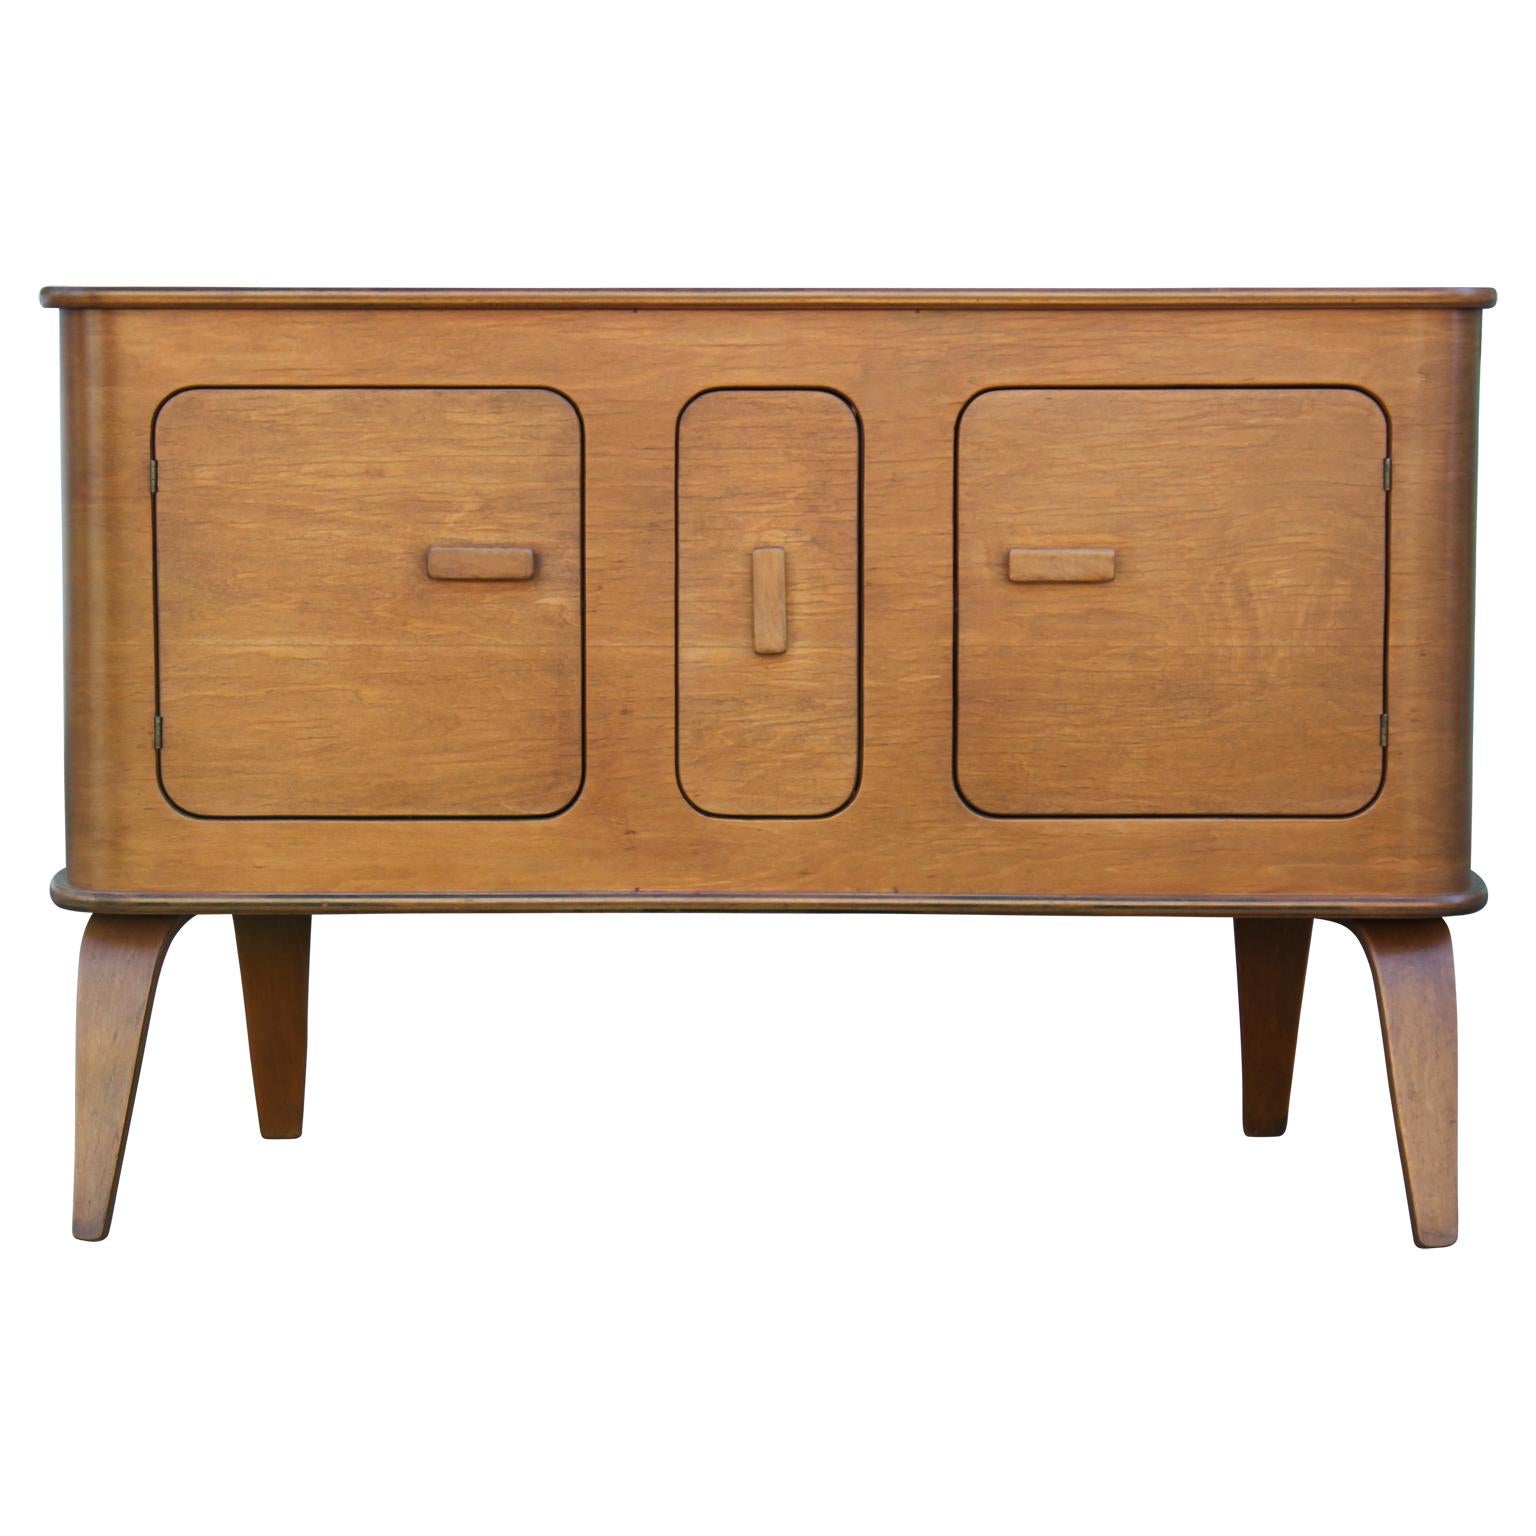 Lovely Mid-Century Modern credenza / sideboard designed by Herbert Von Thaden for Thaden Jordan. Made from molded birchwood. This piece features two open cabinet spaces and a centre drawer.